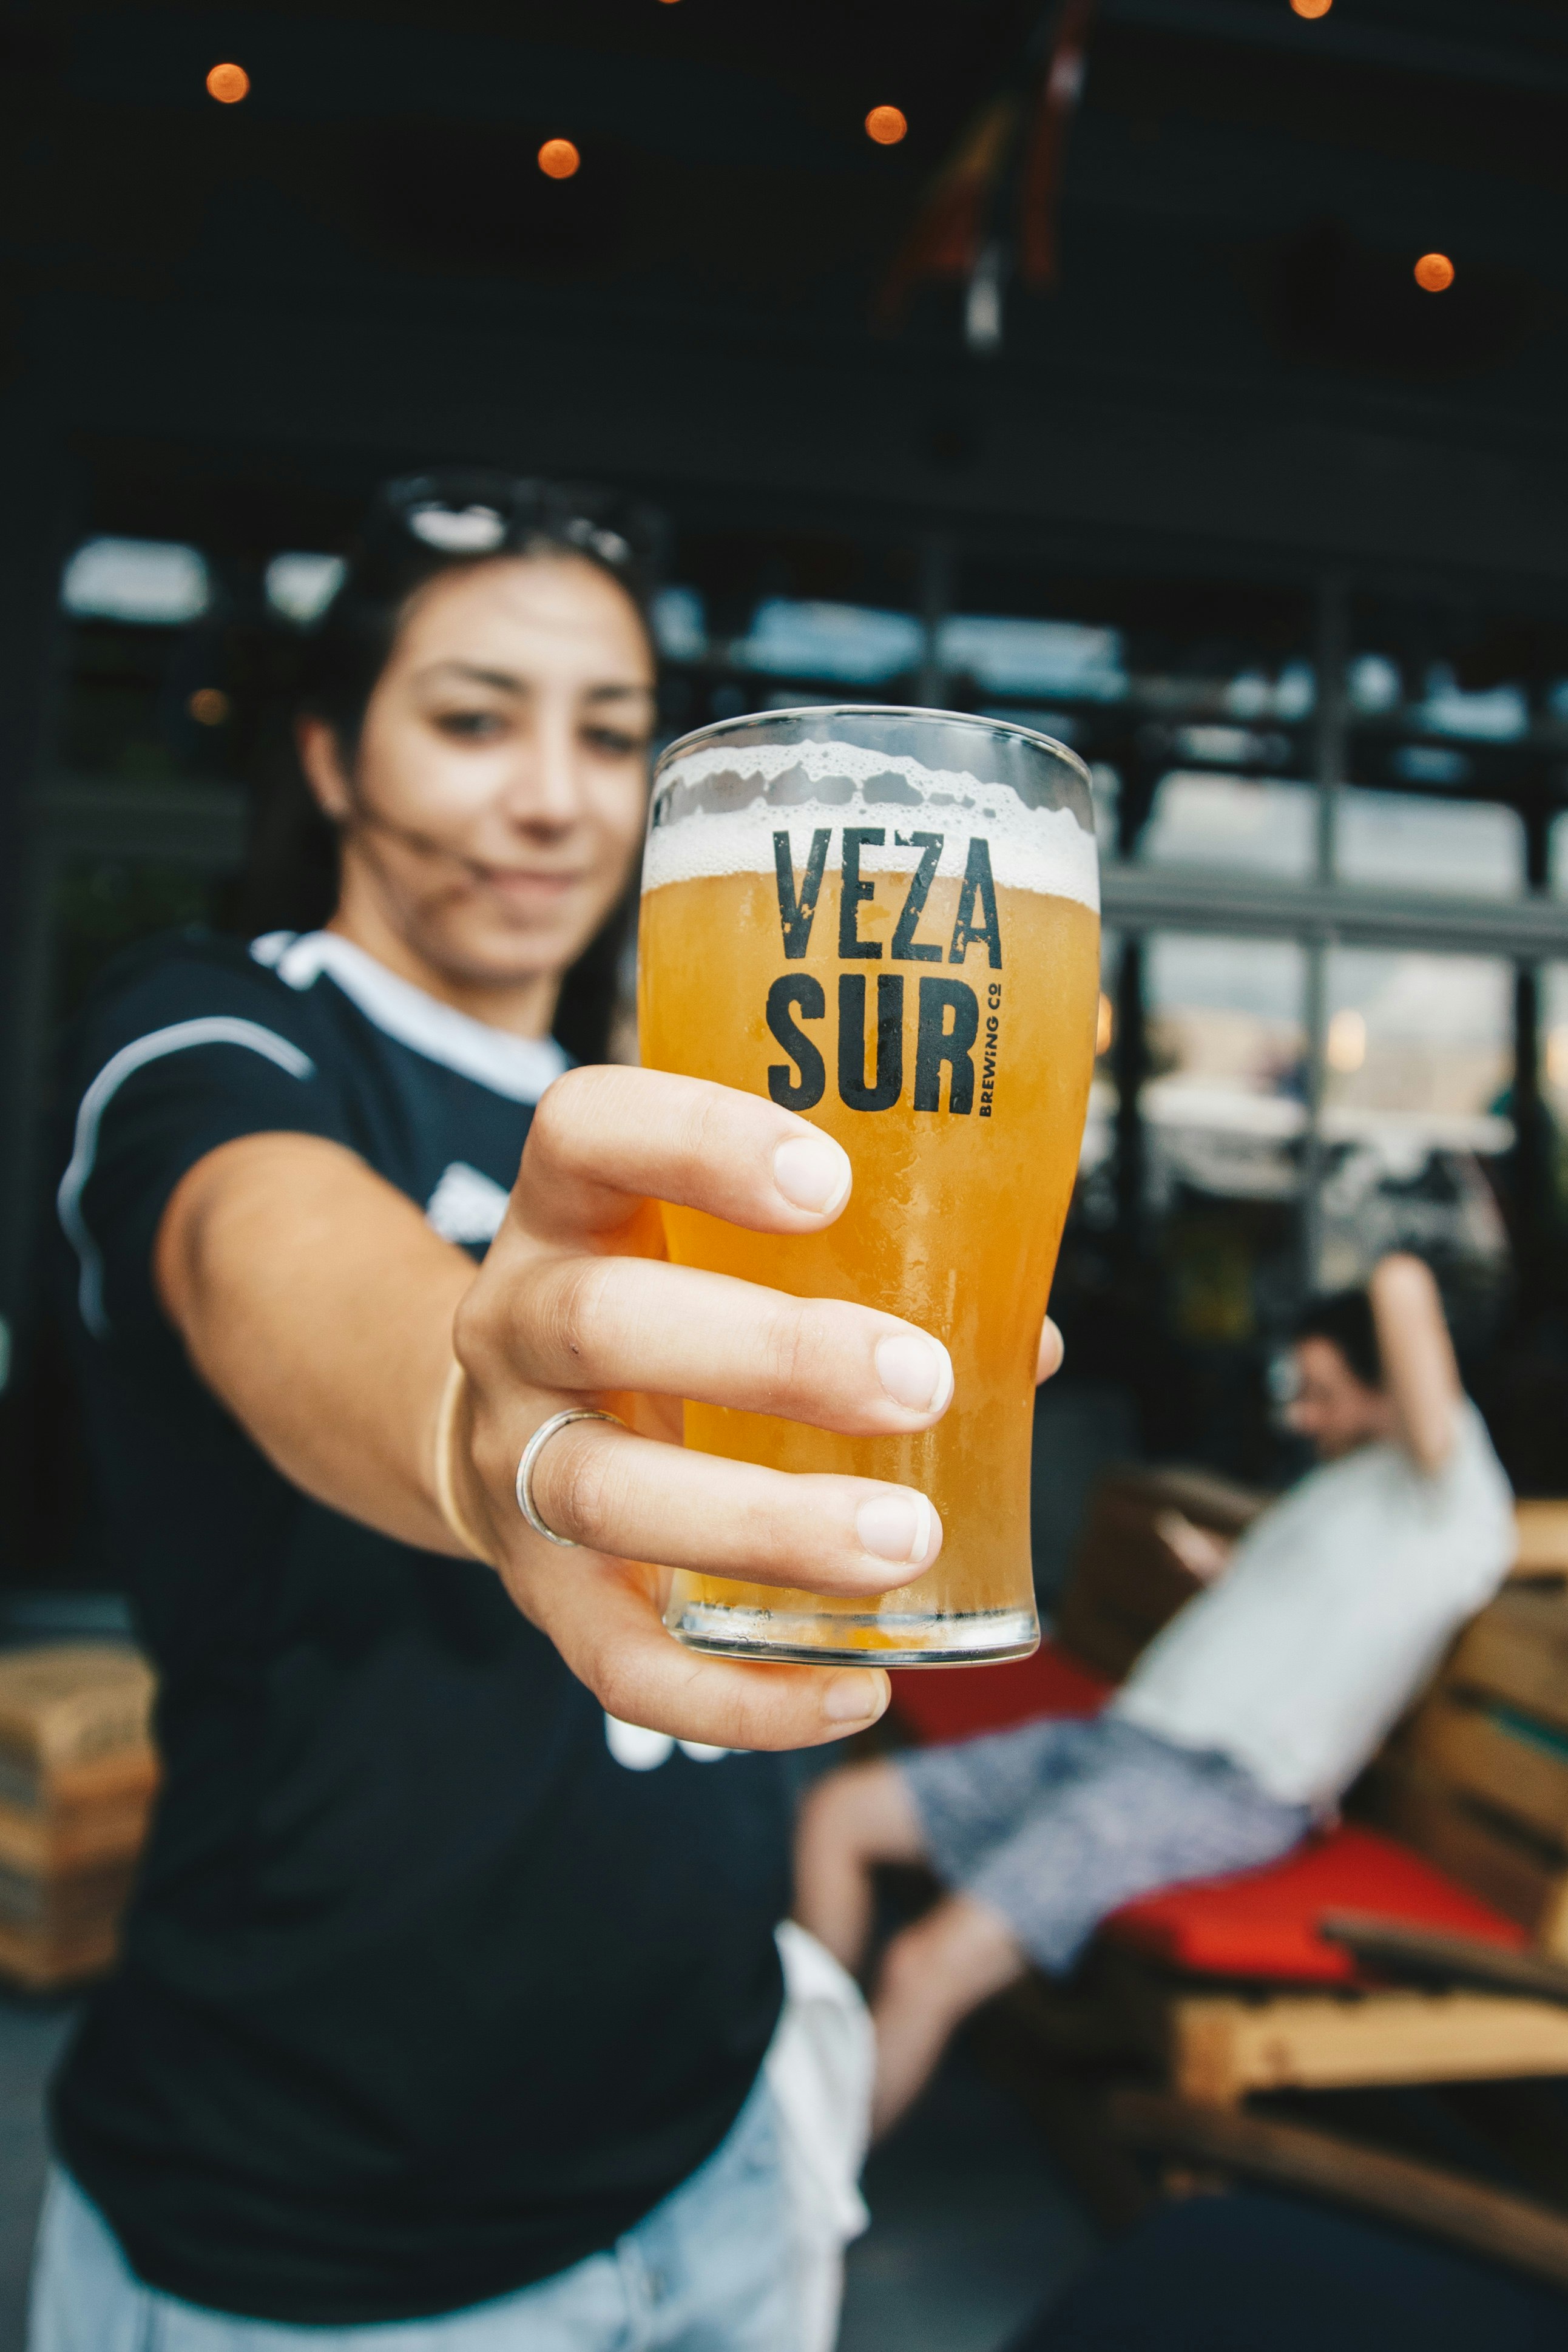 woman holding Veza Sur drinking glass cup filled with beer